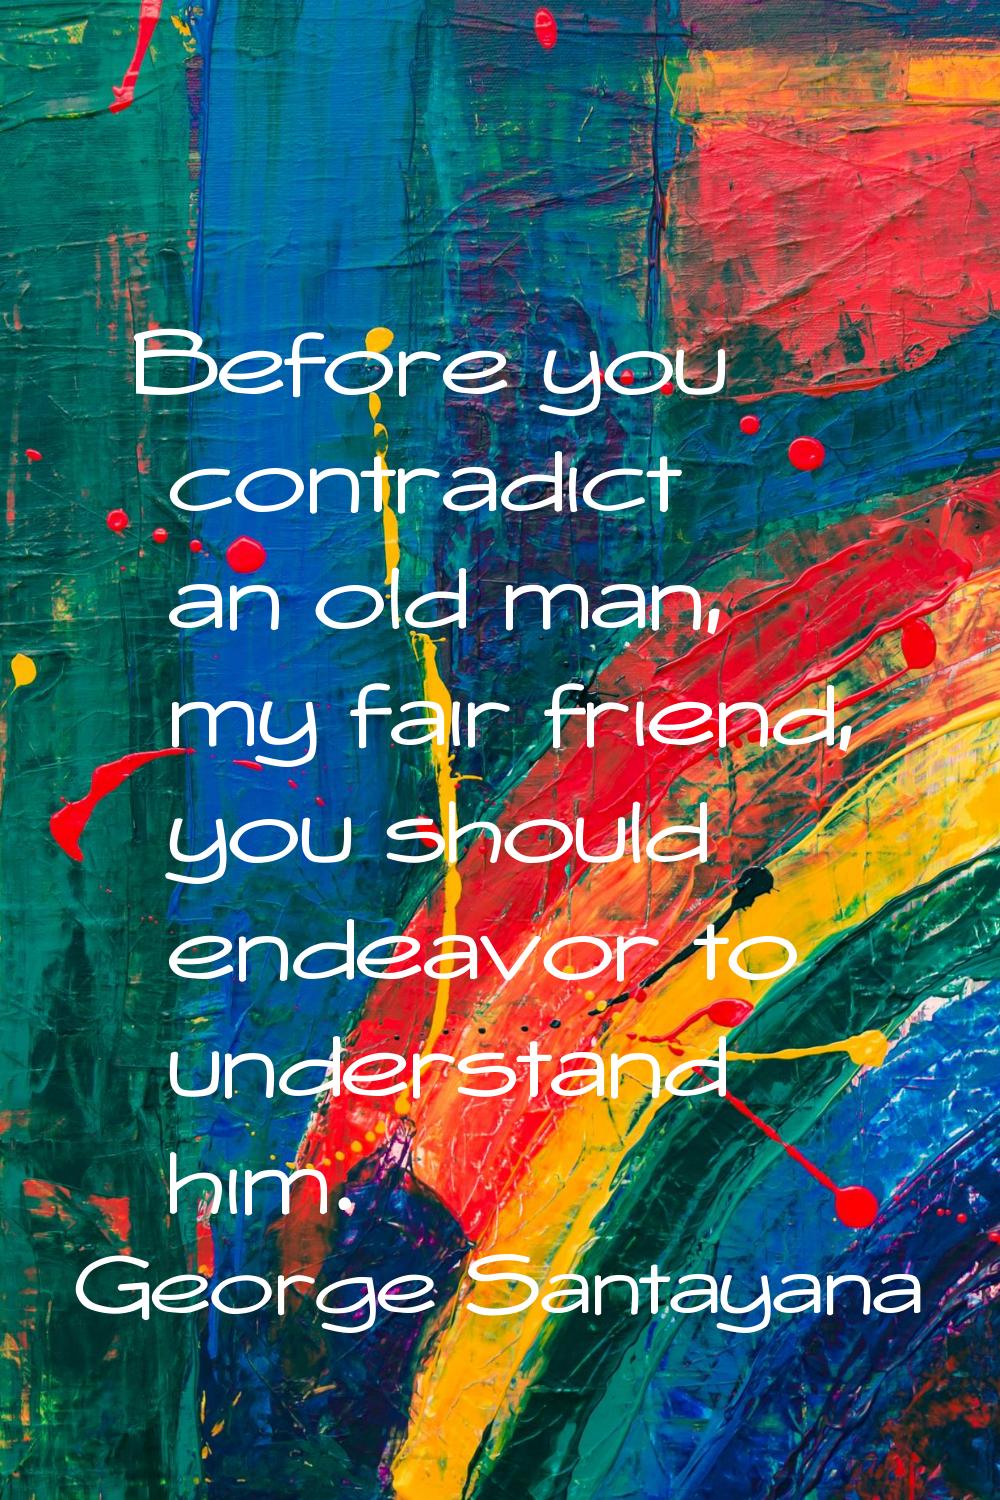 Before you contradict an old man, my fair friend, you should endeavor to understand him.